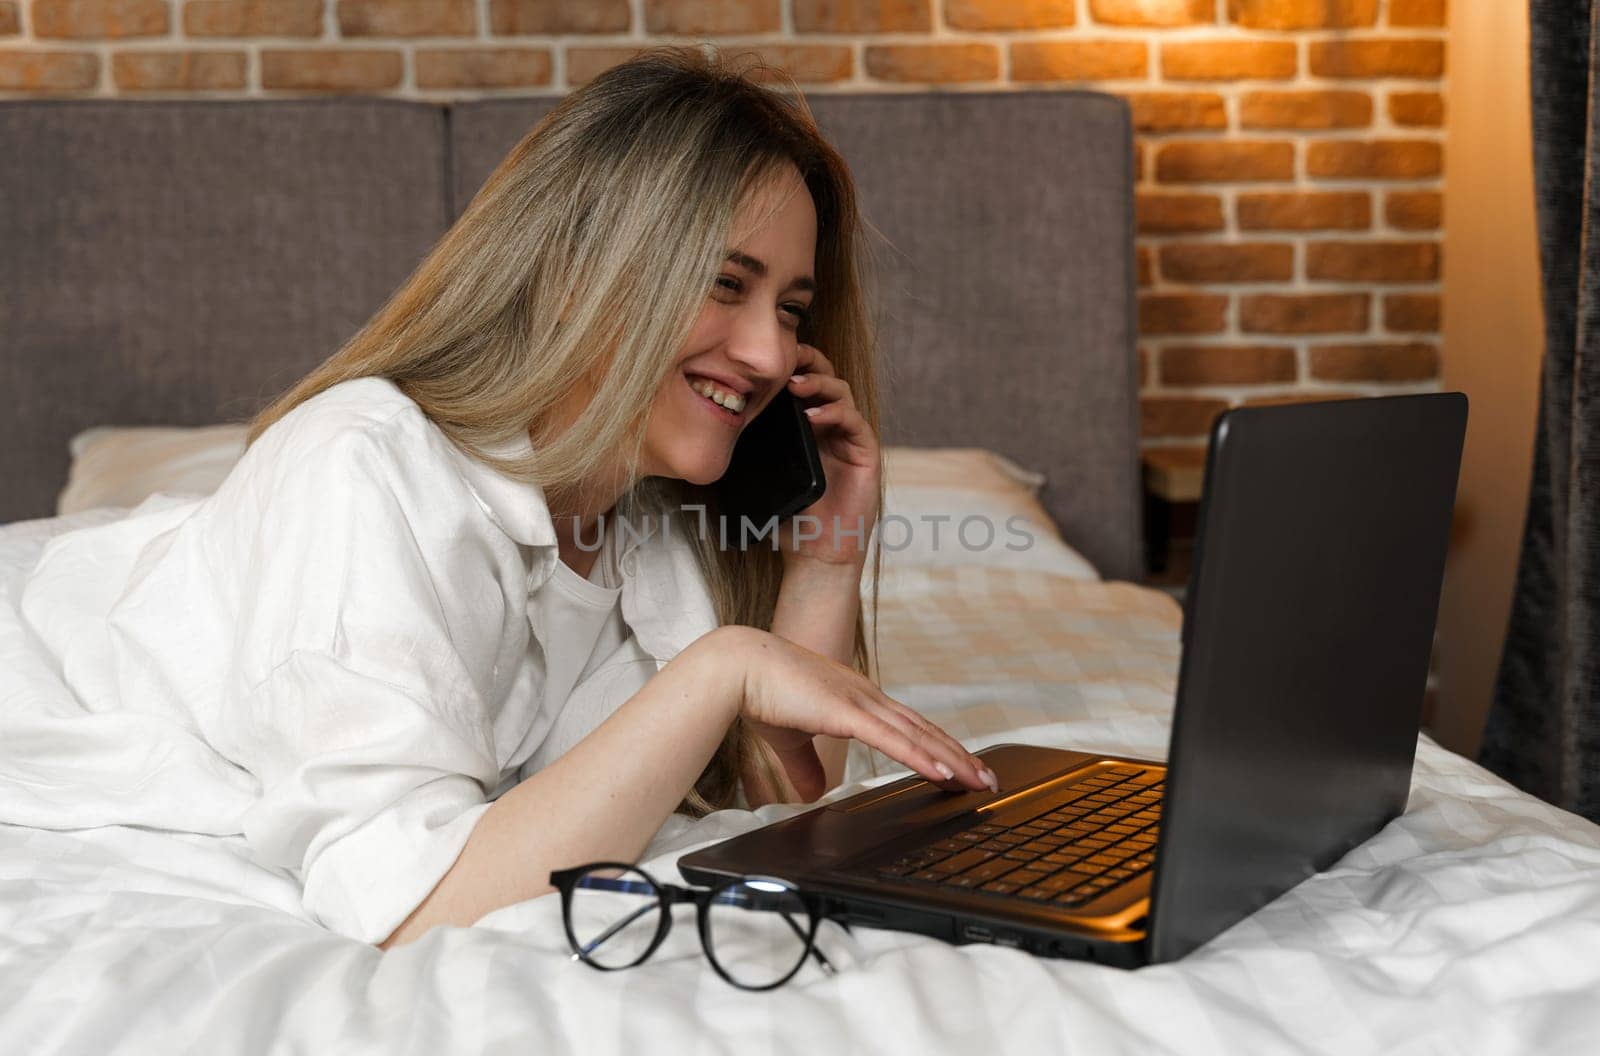 A young beautiful woman is lying on the bed, talking on the phone, looking into a laptop.